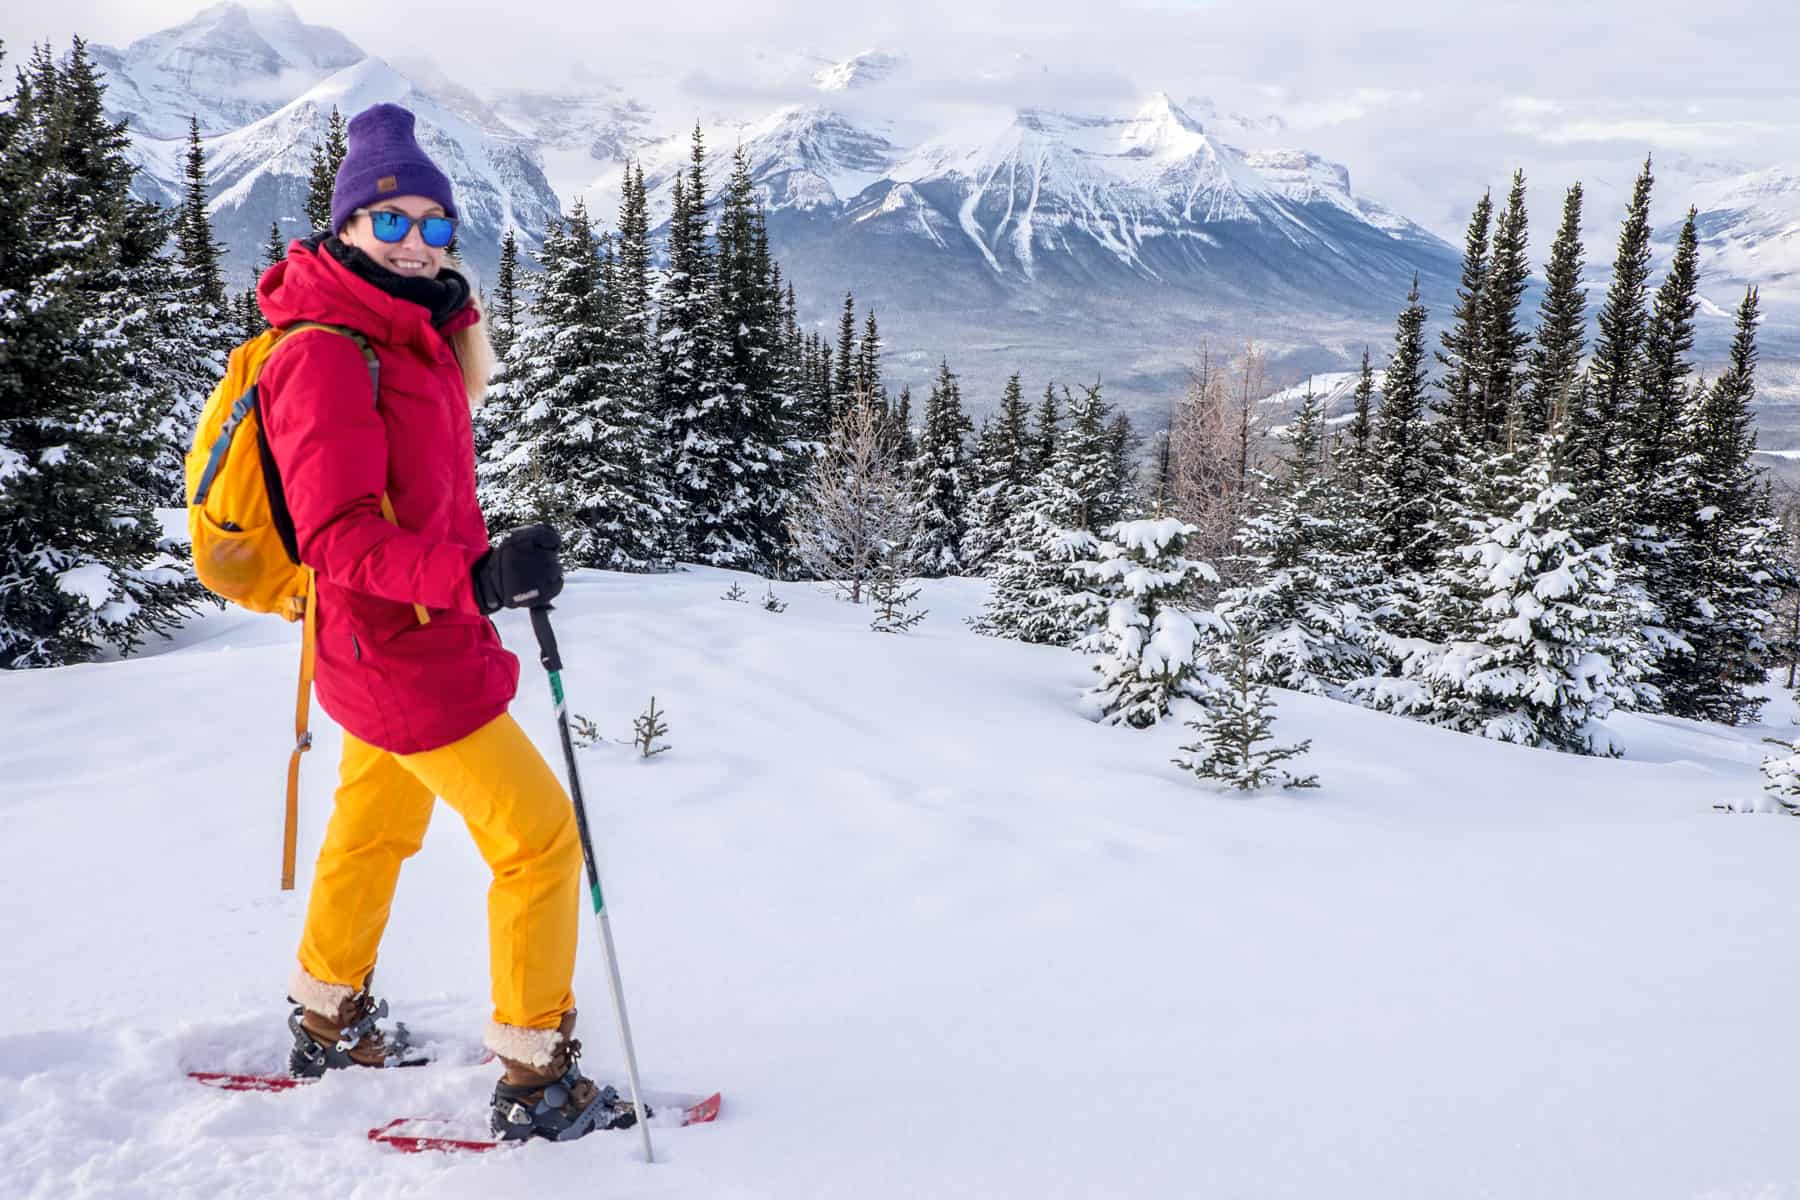 A woman in red and yellow winter clothing snowshoeing on an elevated snow-covered, forested hill overlooking a long ridge of snow-capped Rocky Mountains. 